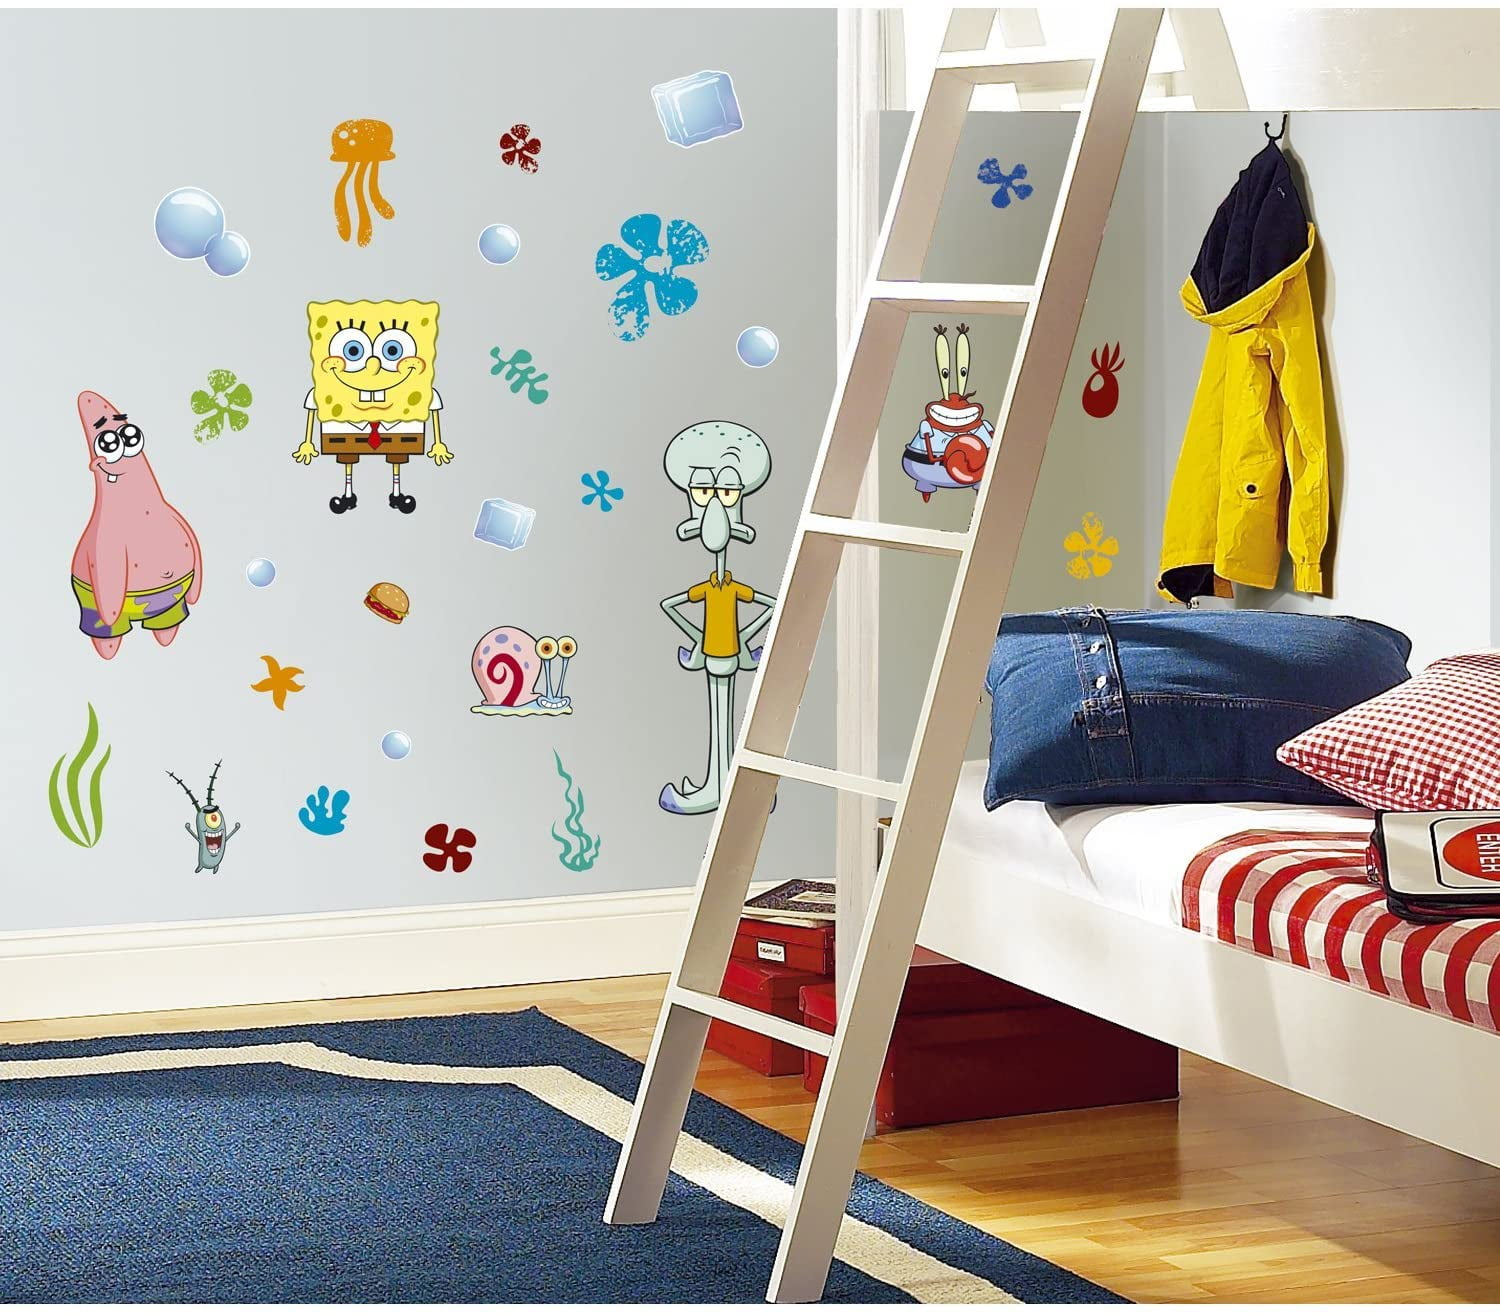 Spongebob Squarepants Personalized Growth Chart Wall Decal for Kids Room 